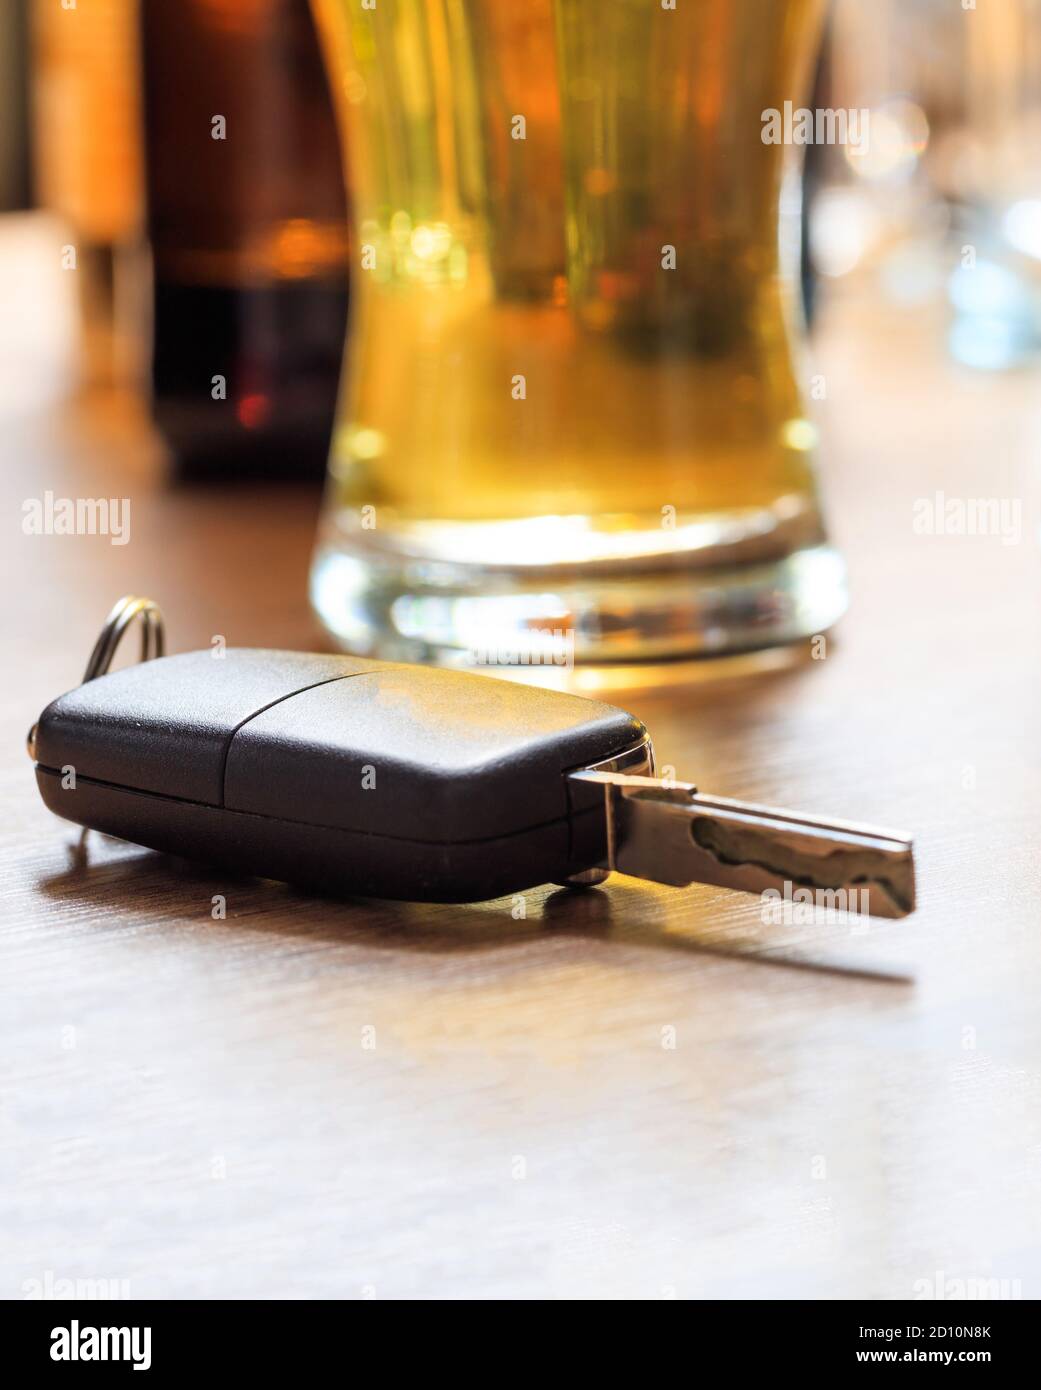 Drinking and driving, dui concept. Car key on a pub counter, beer glasses background, closeup view Stock Photo